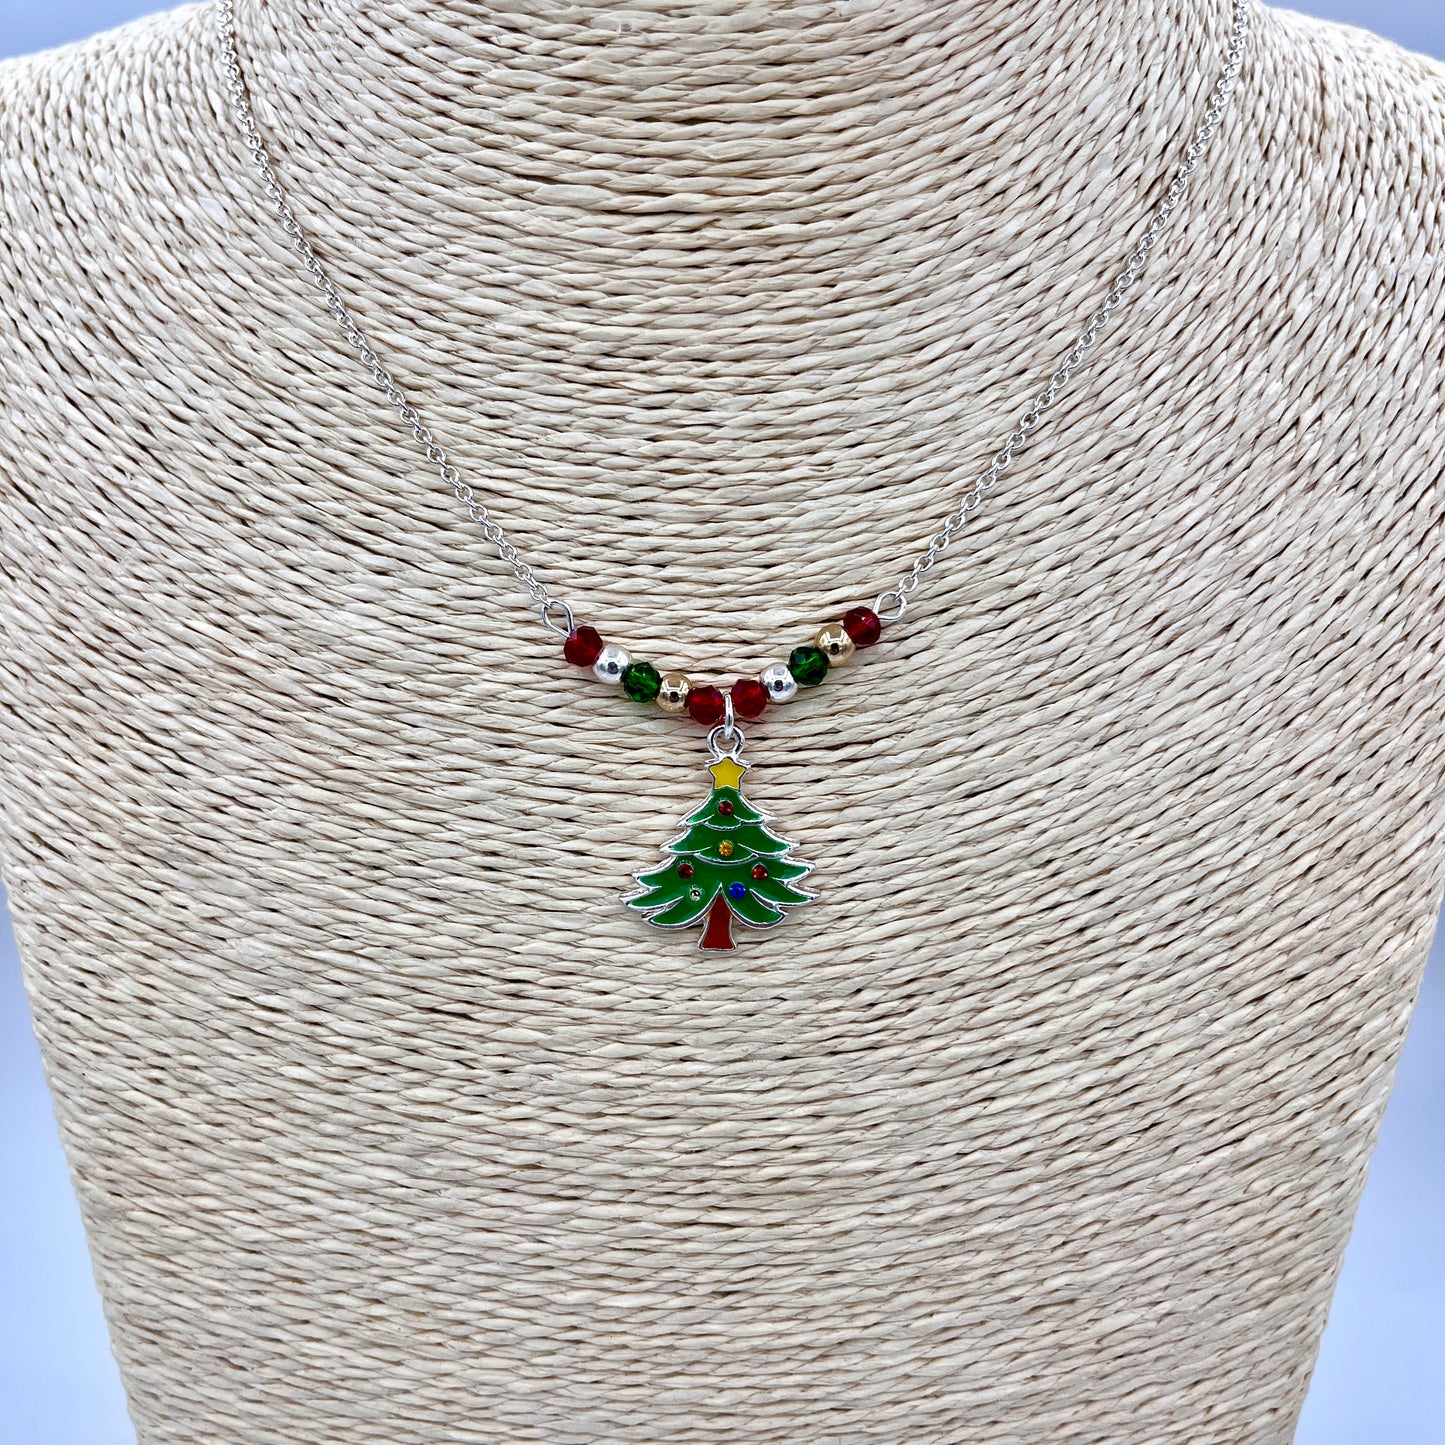 CHRISTMAS TREE WITH BEADS ON SILVER CHAIN